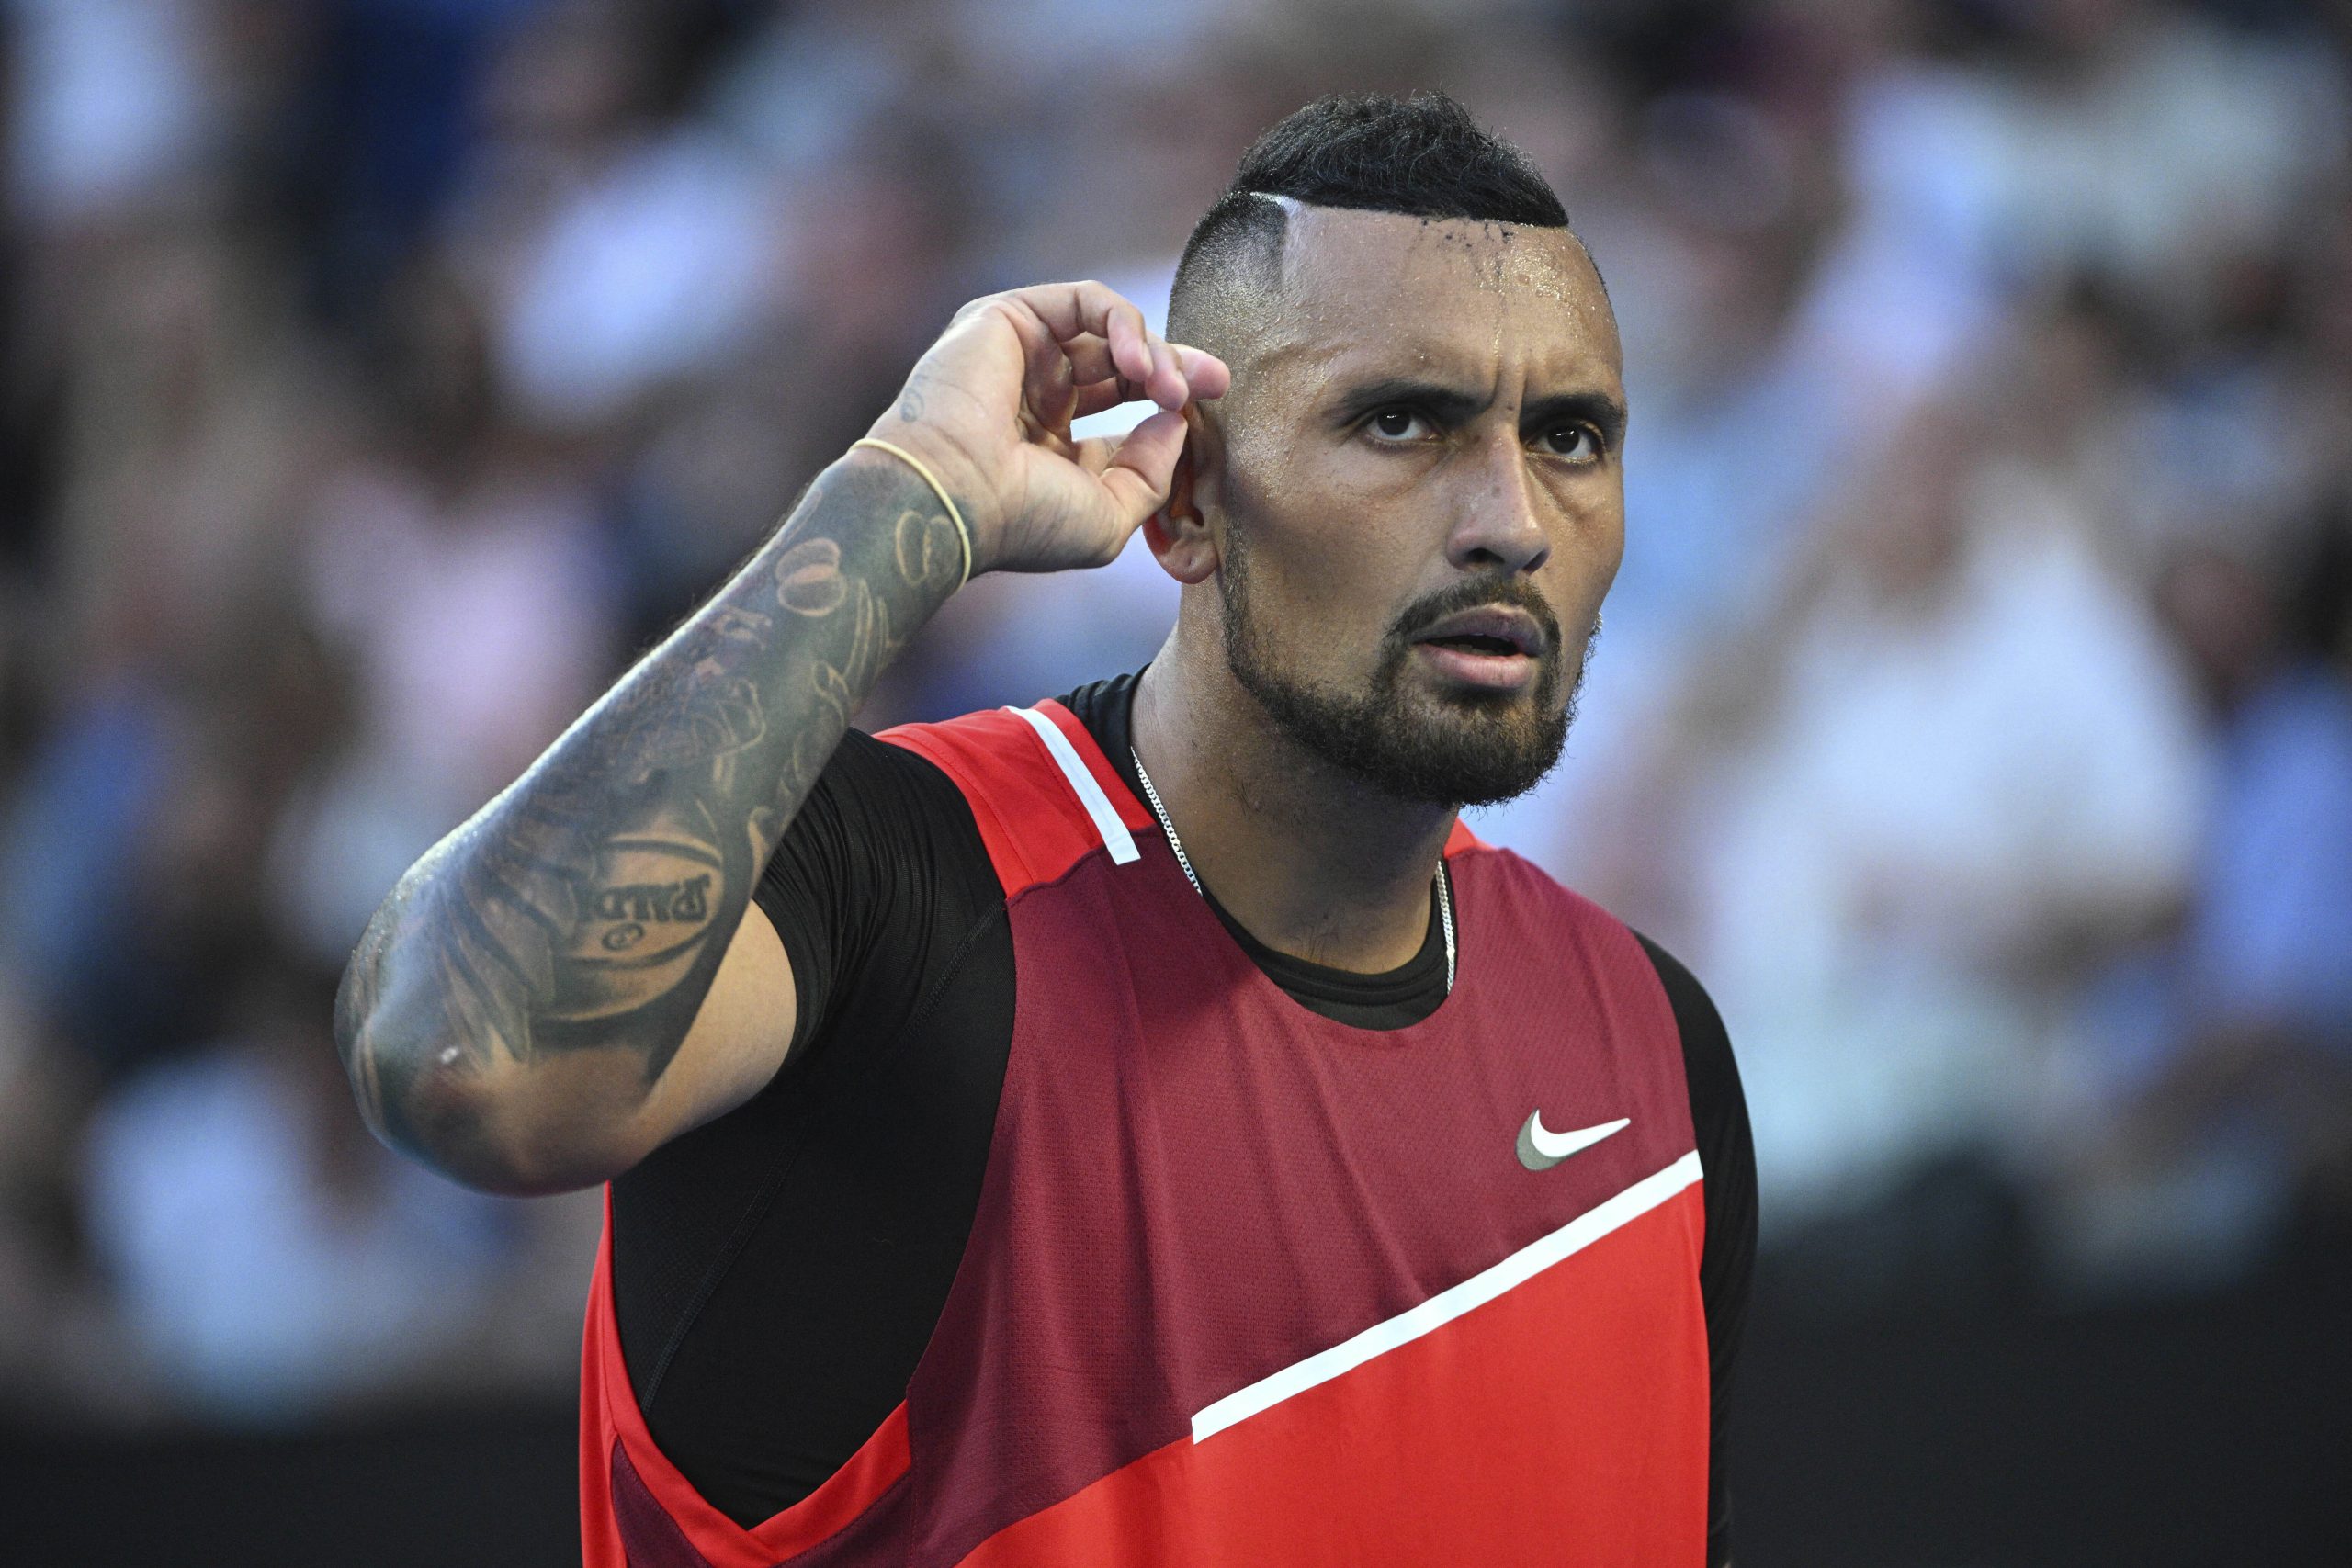 Watch: Nick Kyrgios accidentally hits young fan, gifts racket to console him